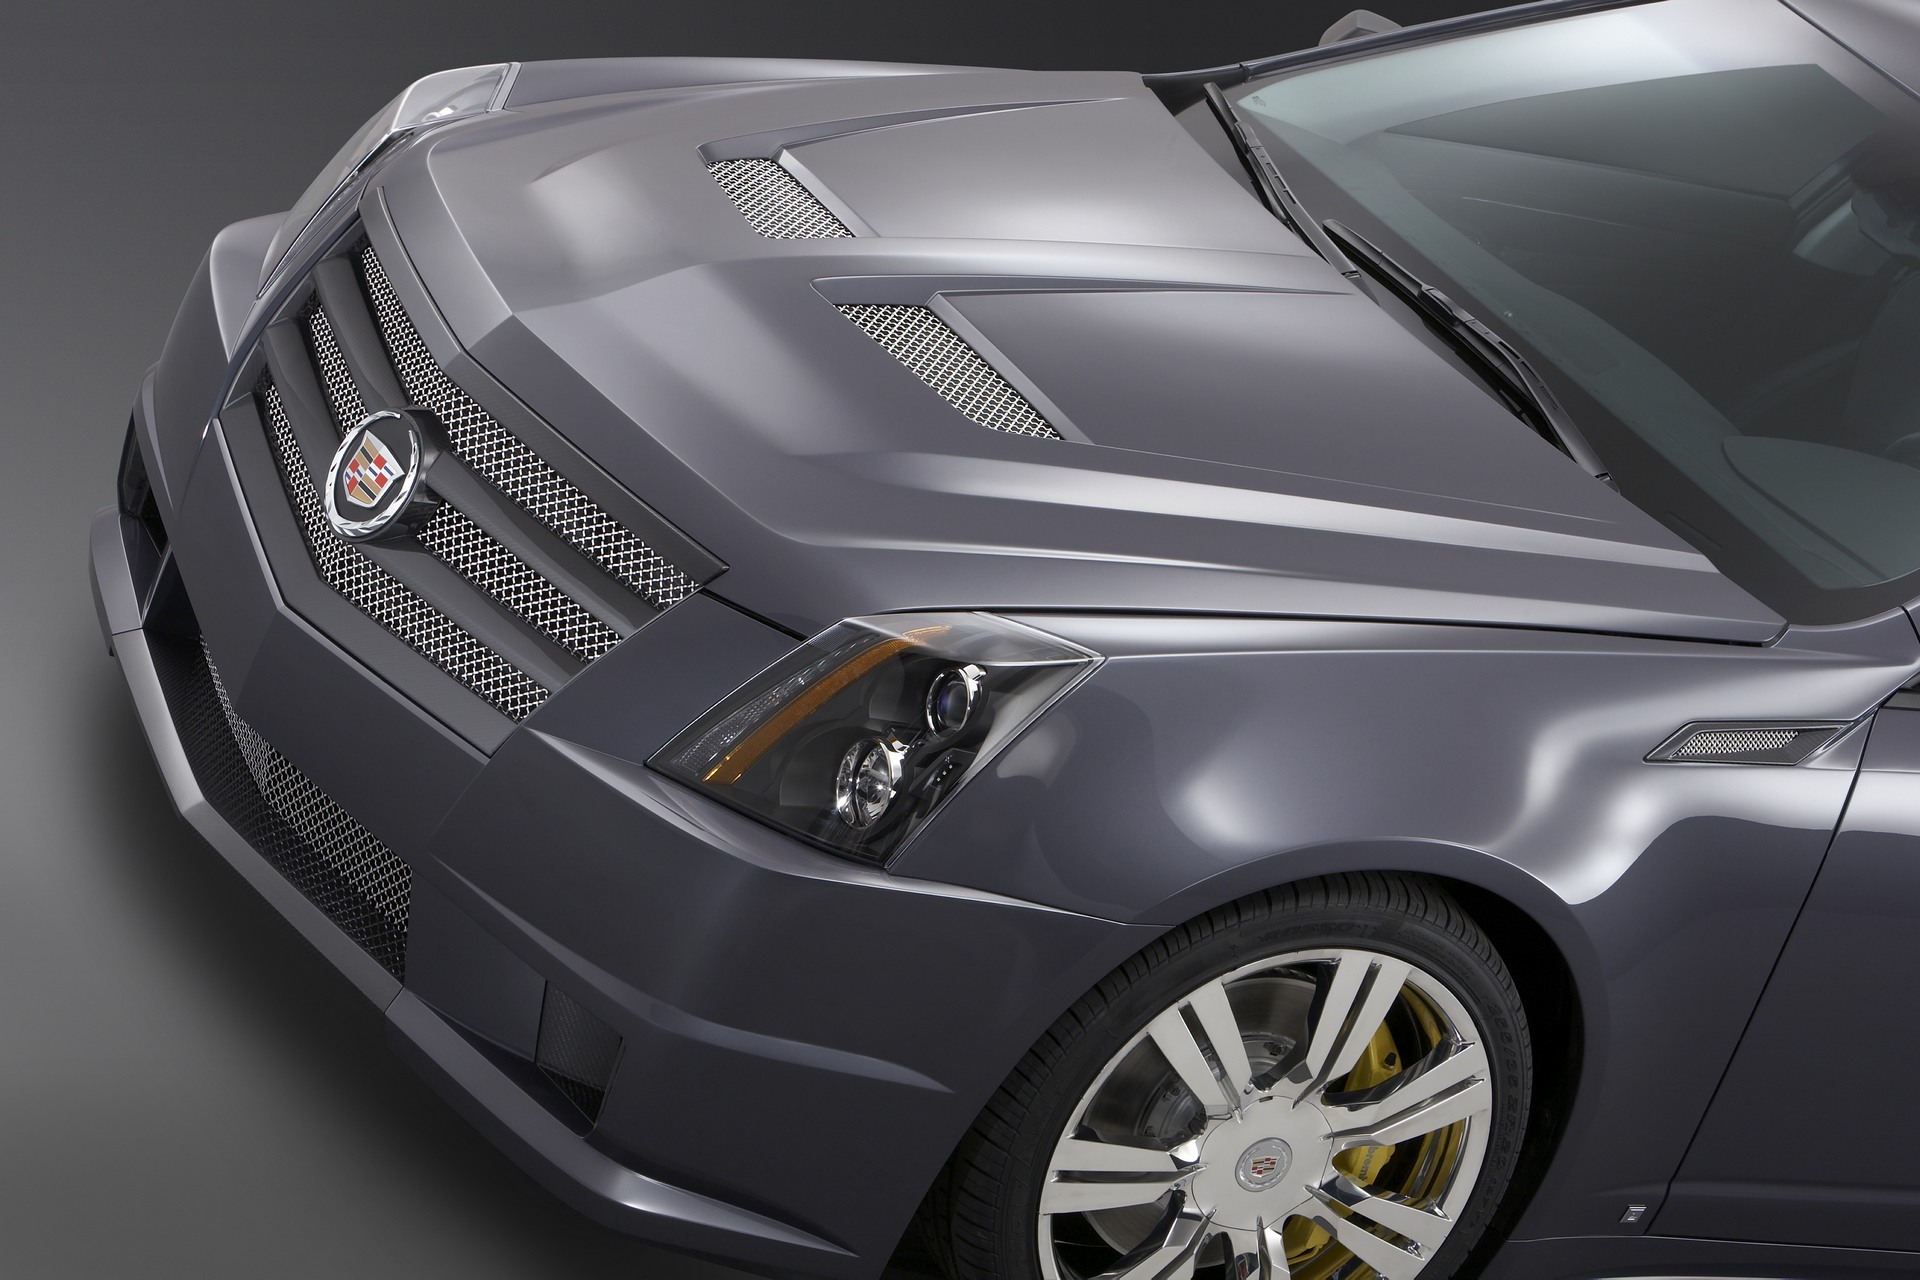 2007 Cadillac CTS Sport Concept